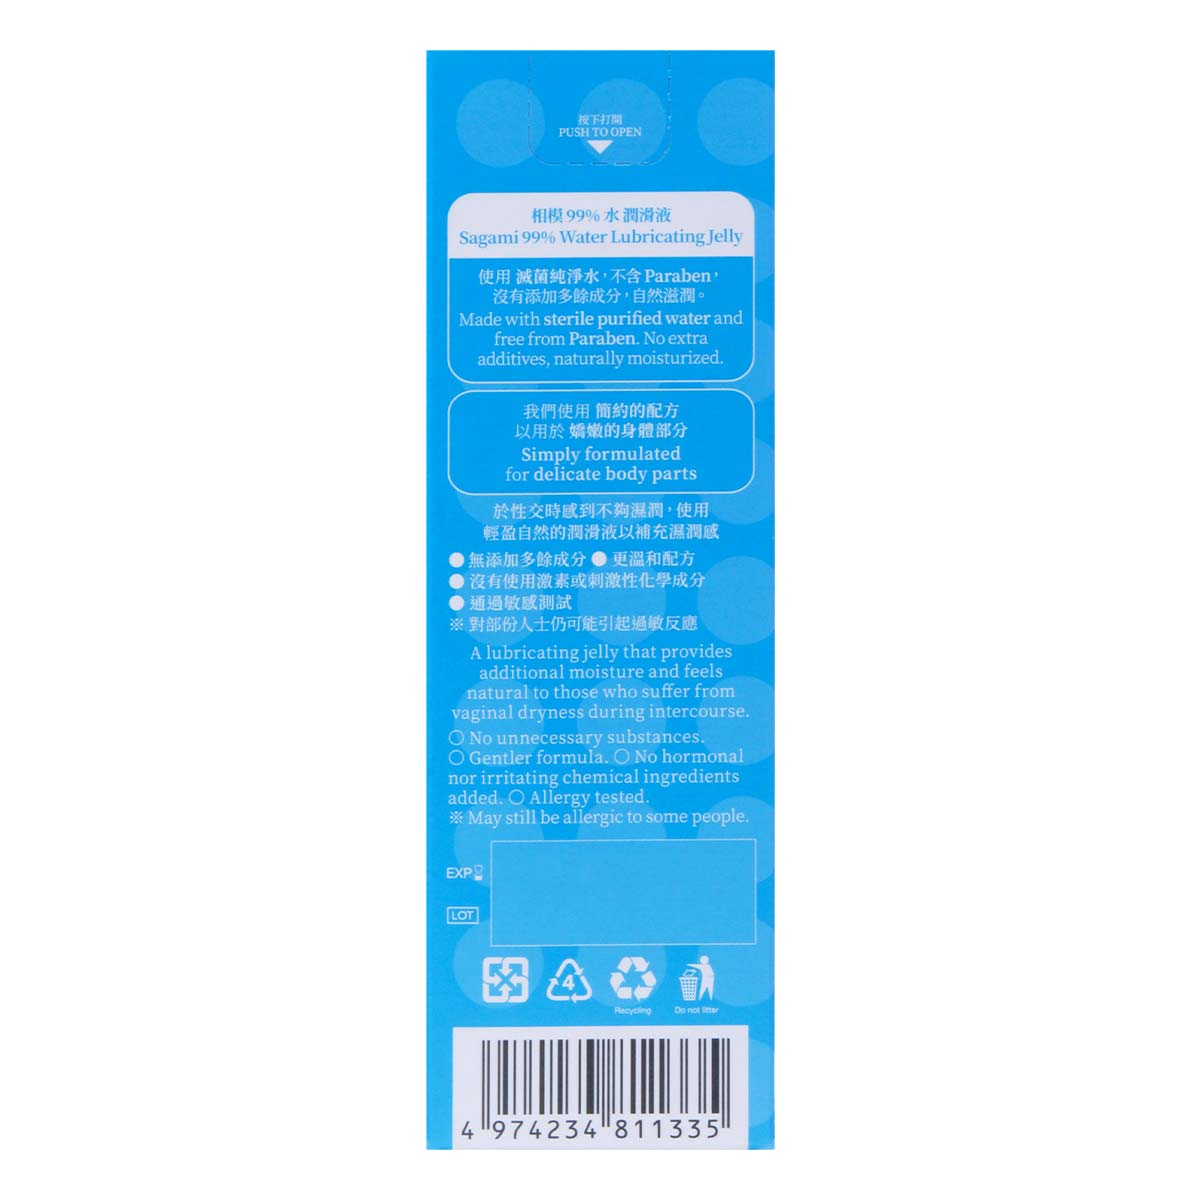 Sagami 99% Water Lubricating Jelly 60g Water-based Lubricant-p_3